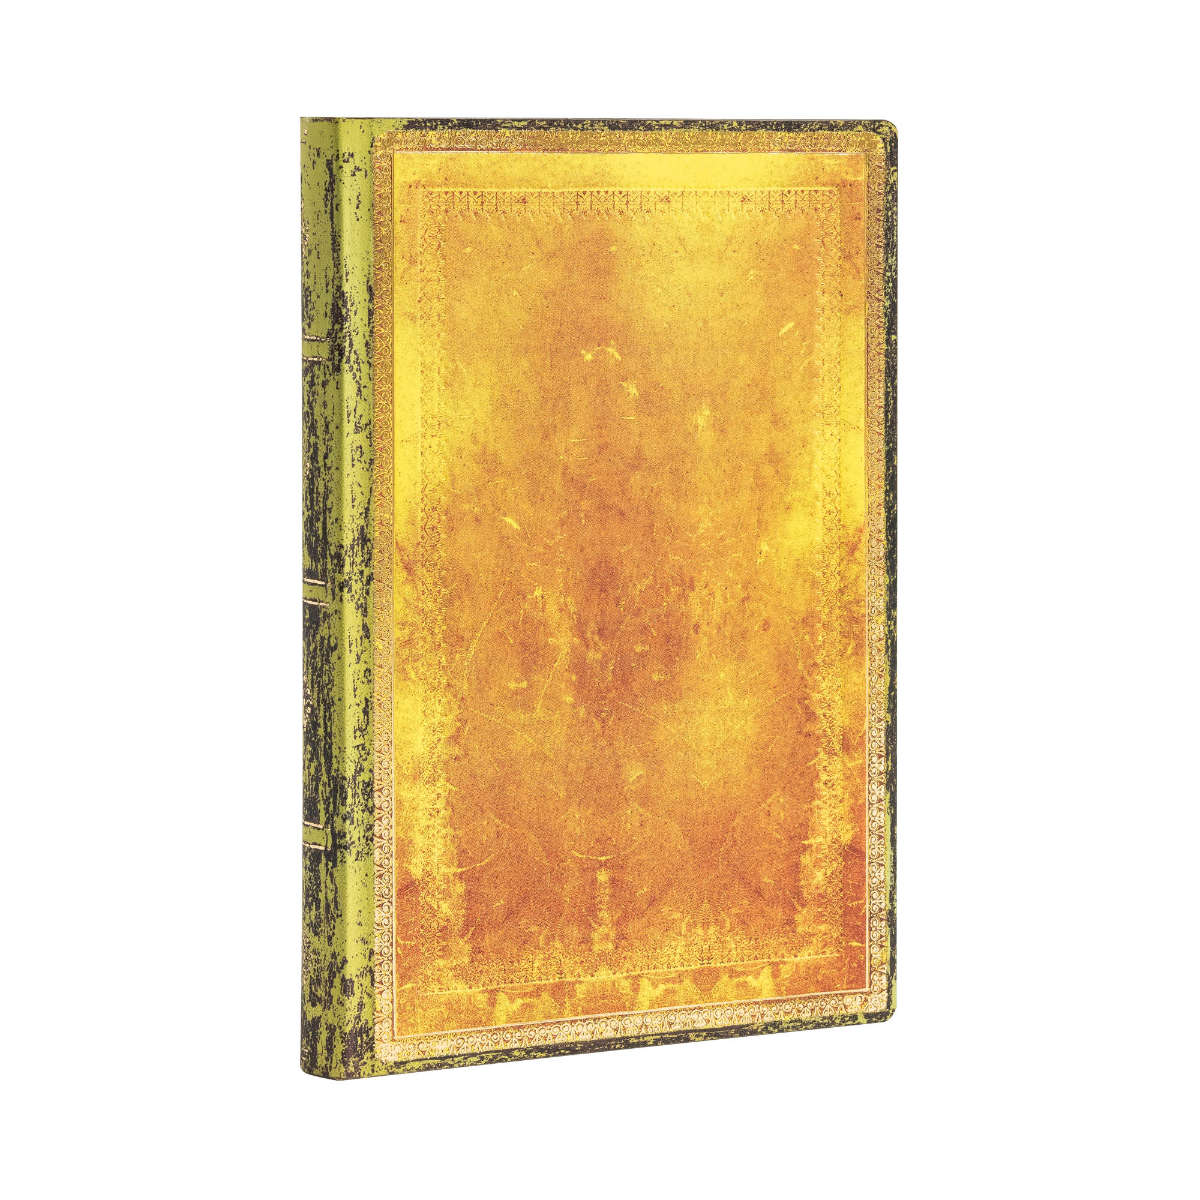 Paperblanks Flexis Old Leather Ochre Mini 3.75 x 5.5 Inch